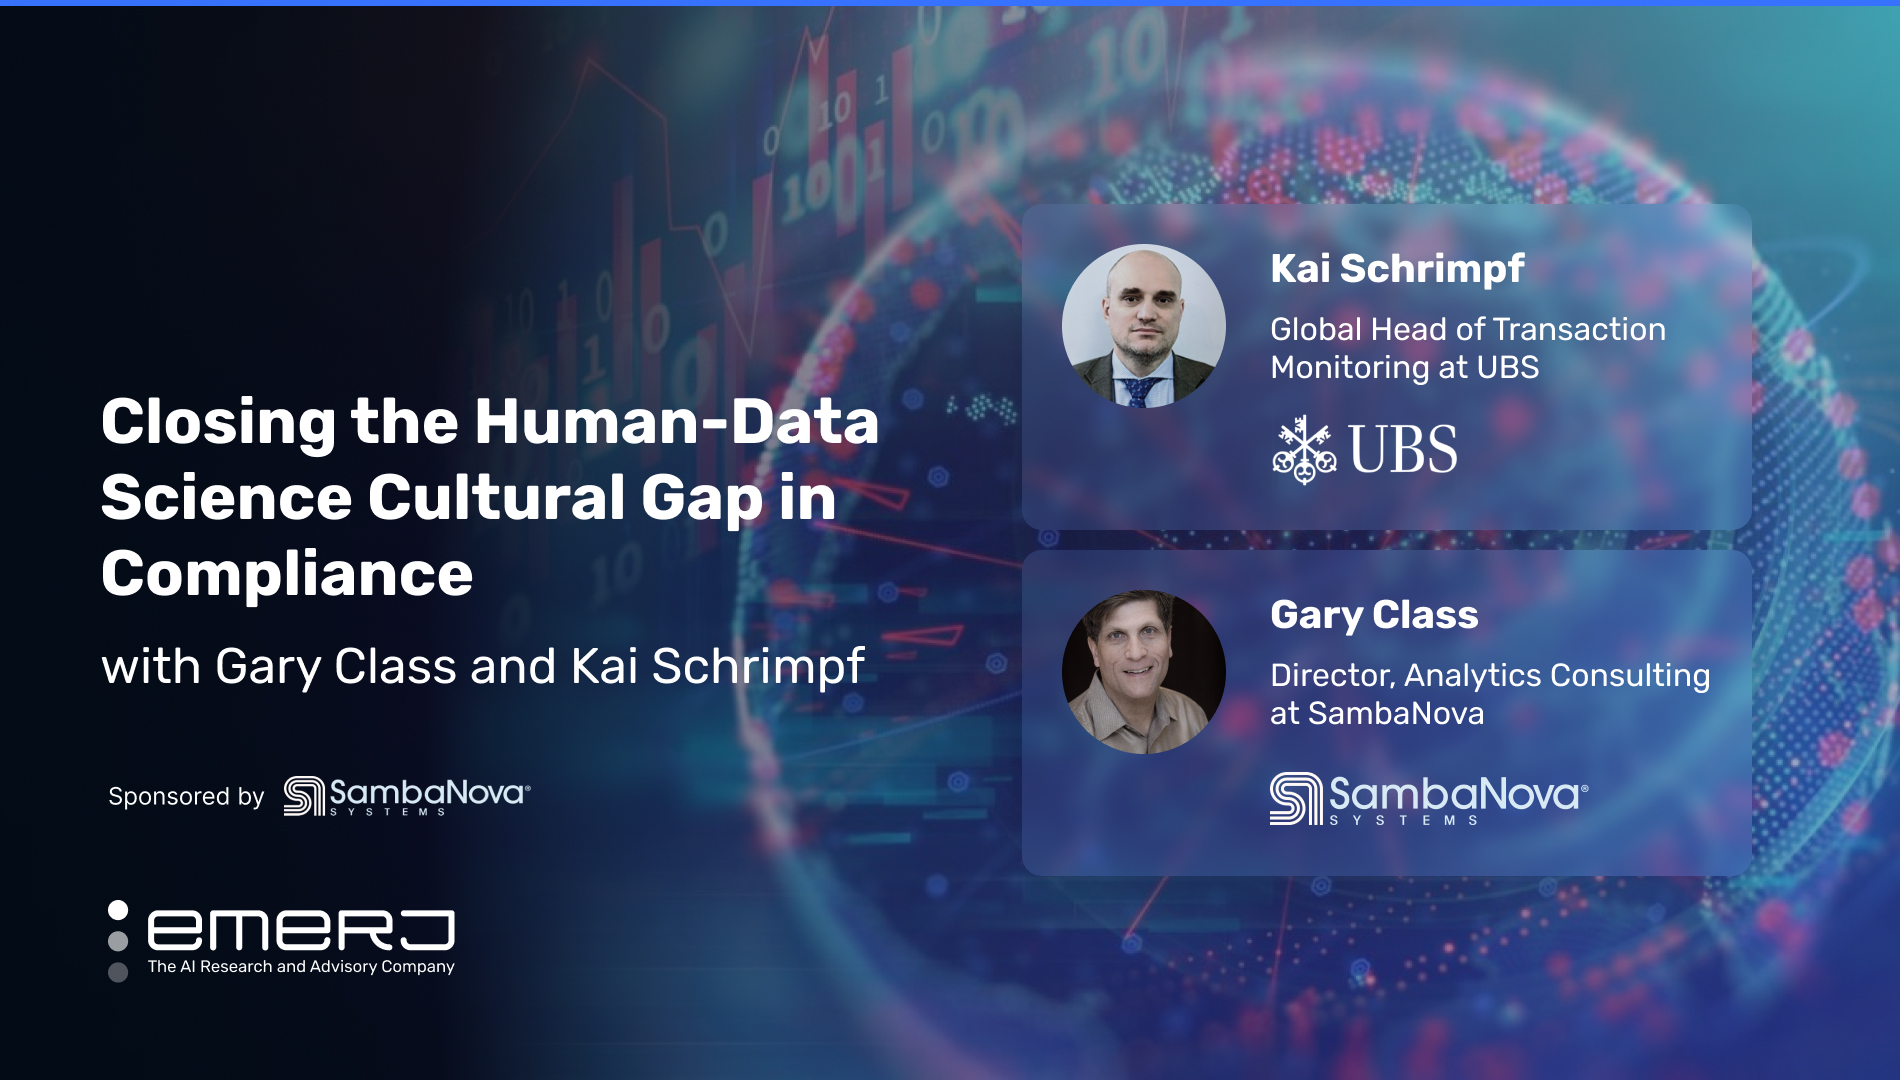 Closing the Human-Data Science Cultural Gap in Compliance — with Gary Class and Kai Schrimpf